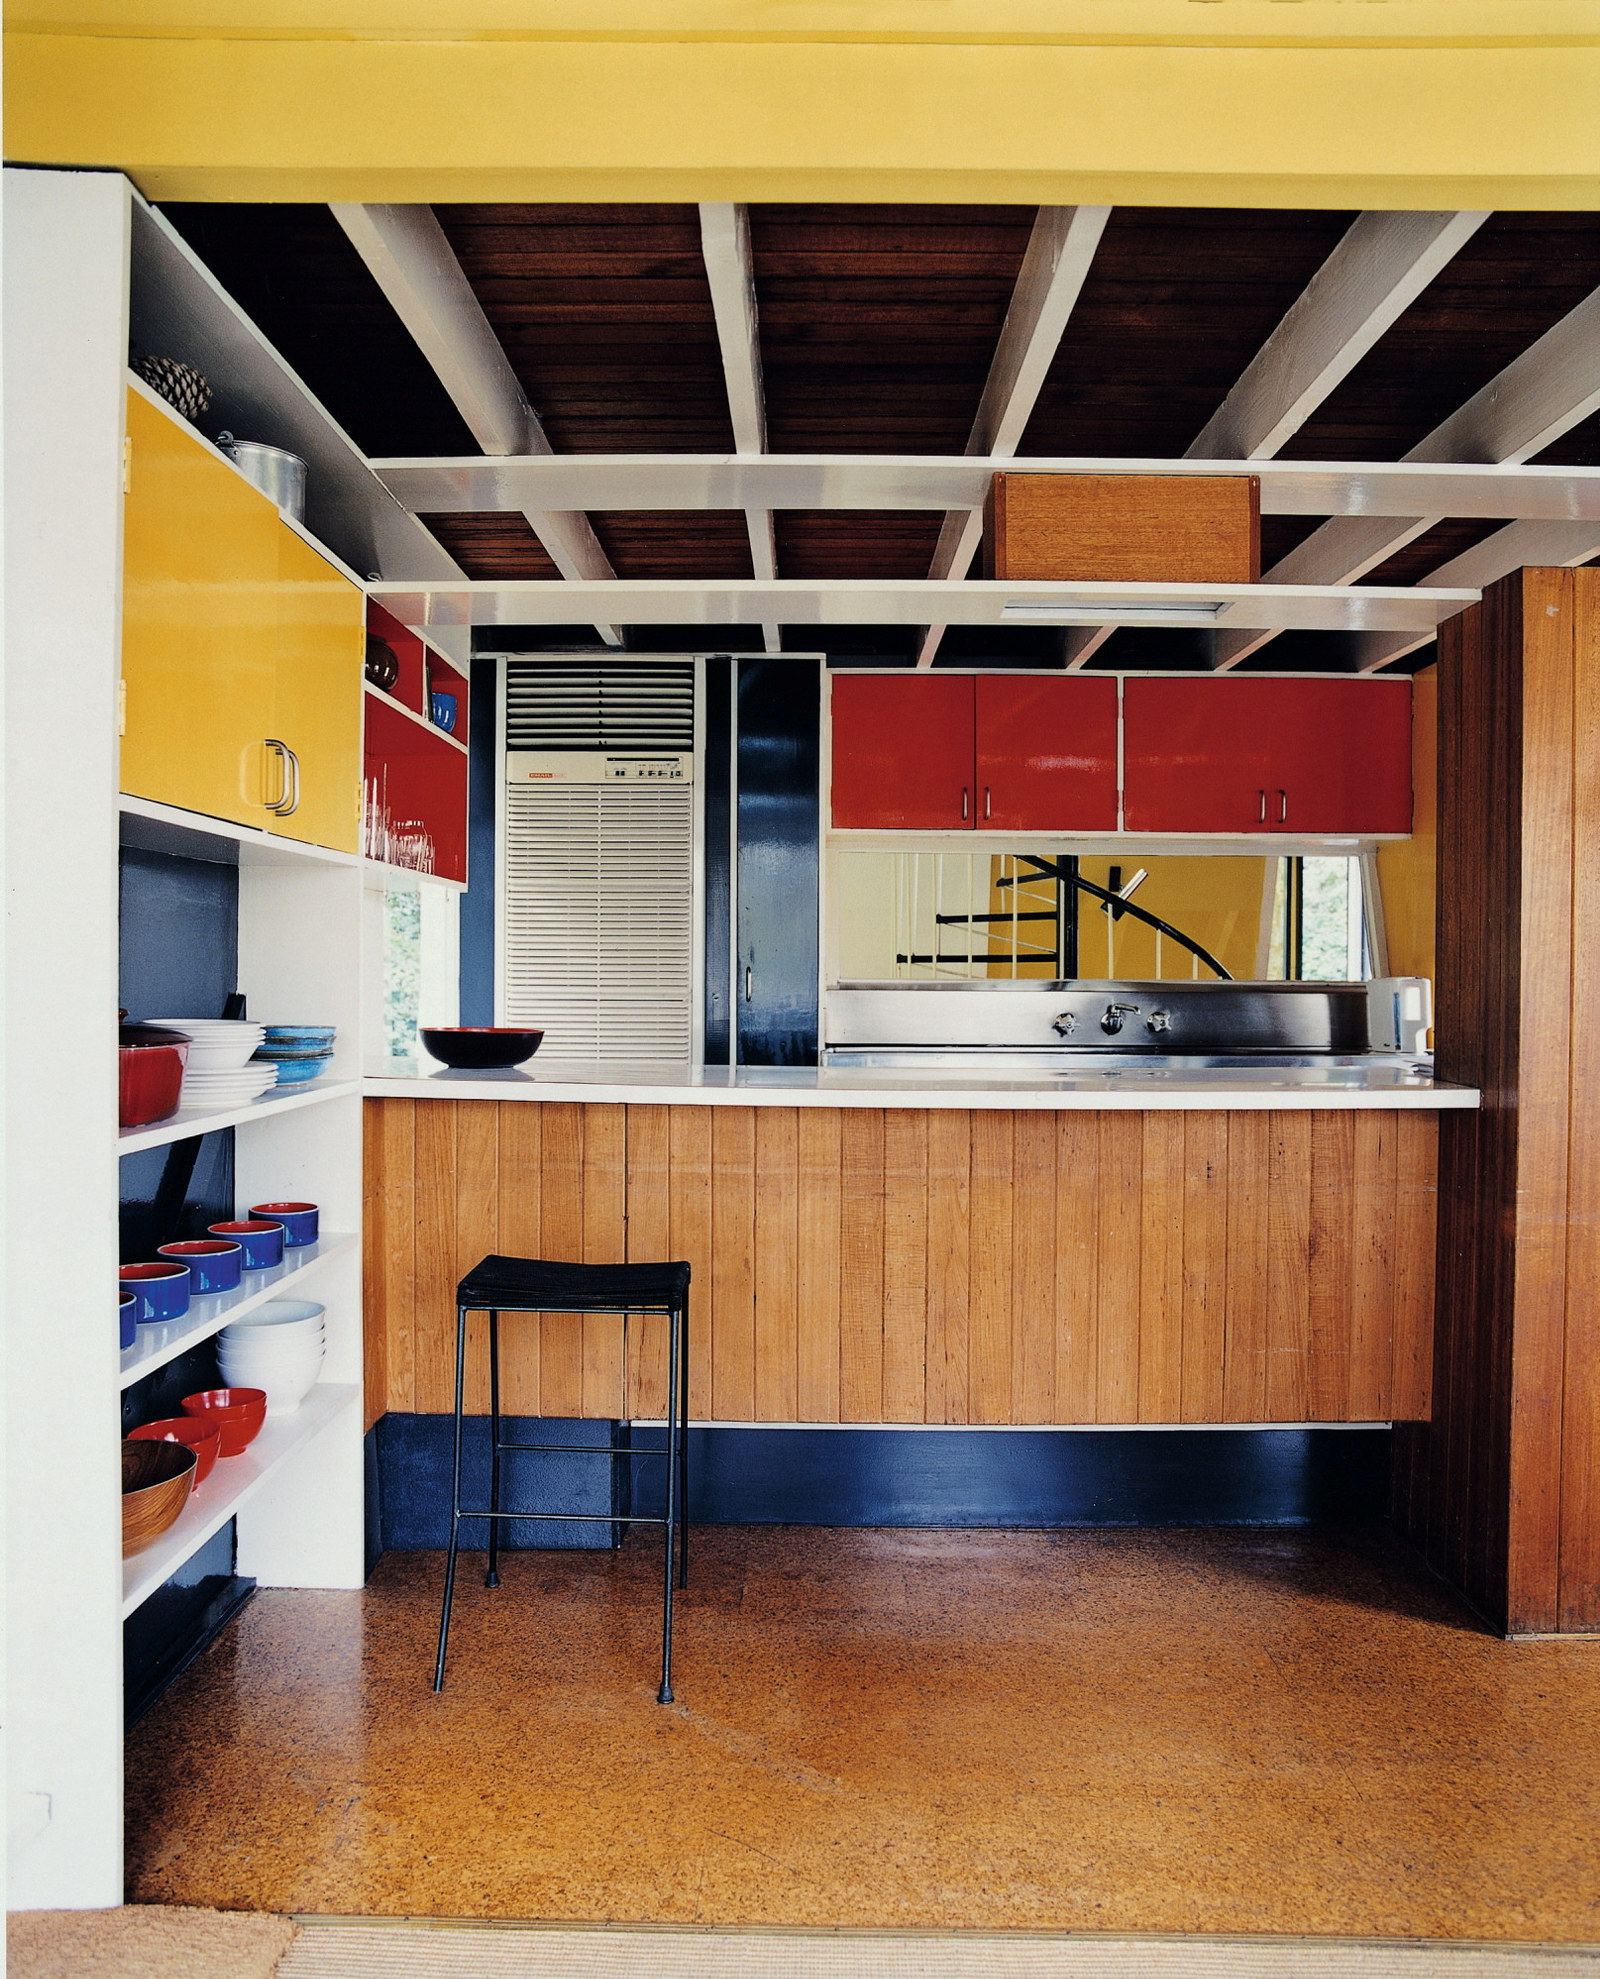 The kitchen of the Butterfly house featuring a bold colour palette for cupboard doors and the inside of the shelving